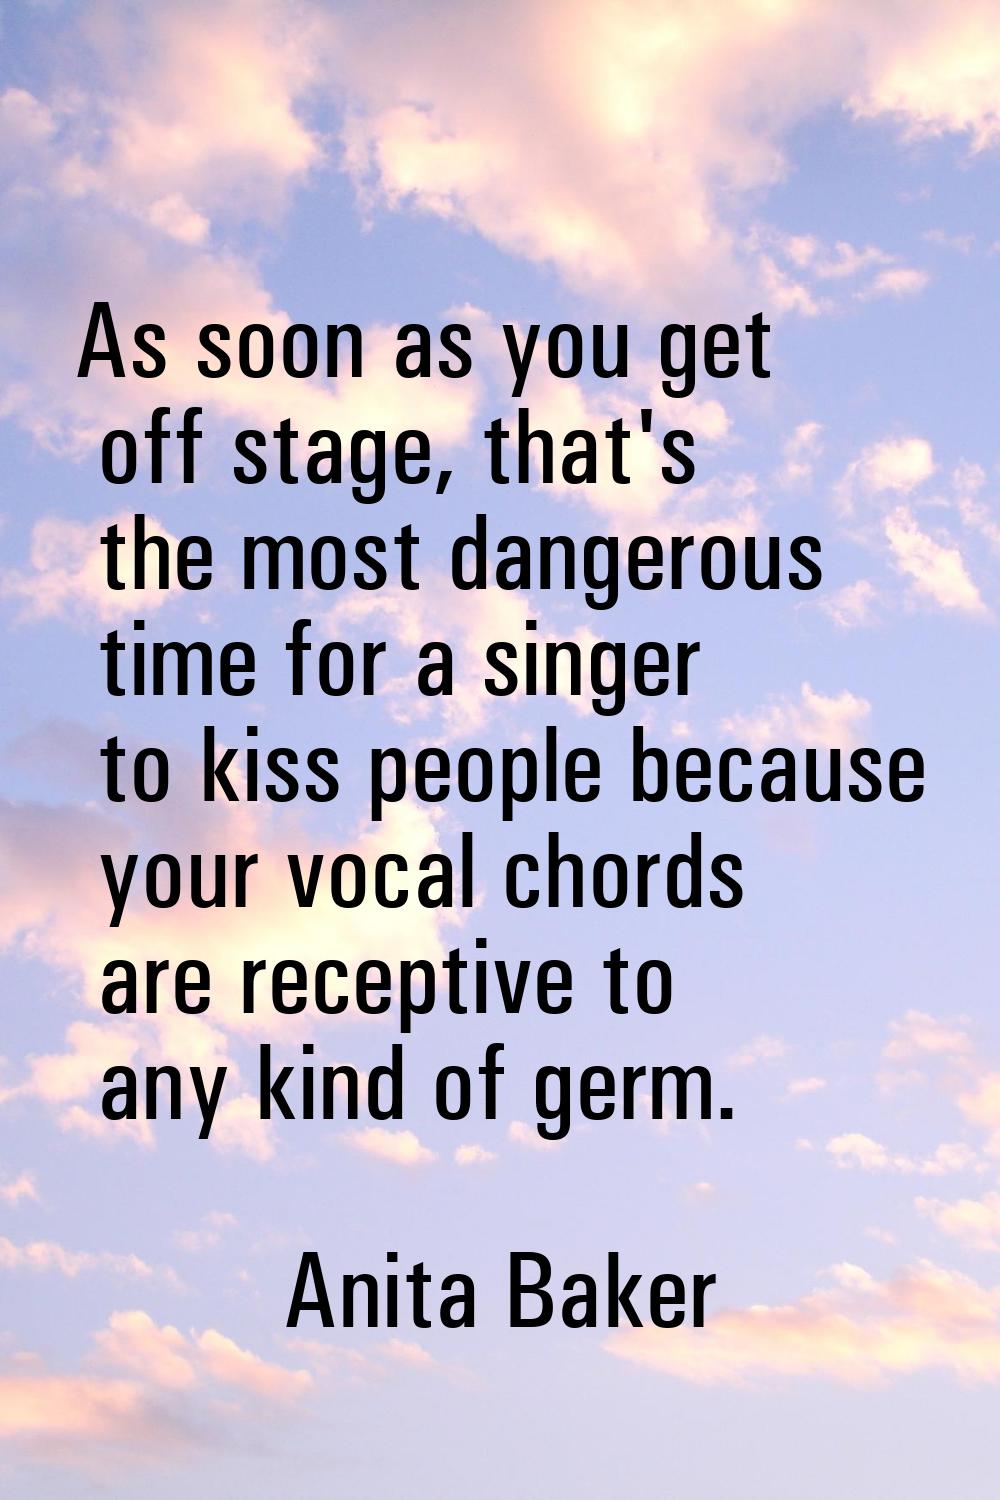 As soon as you get off stage, that's the most dangerous time for a singer to kiss people because yo